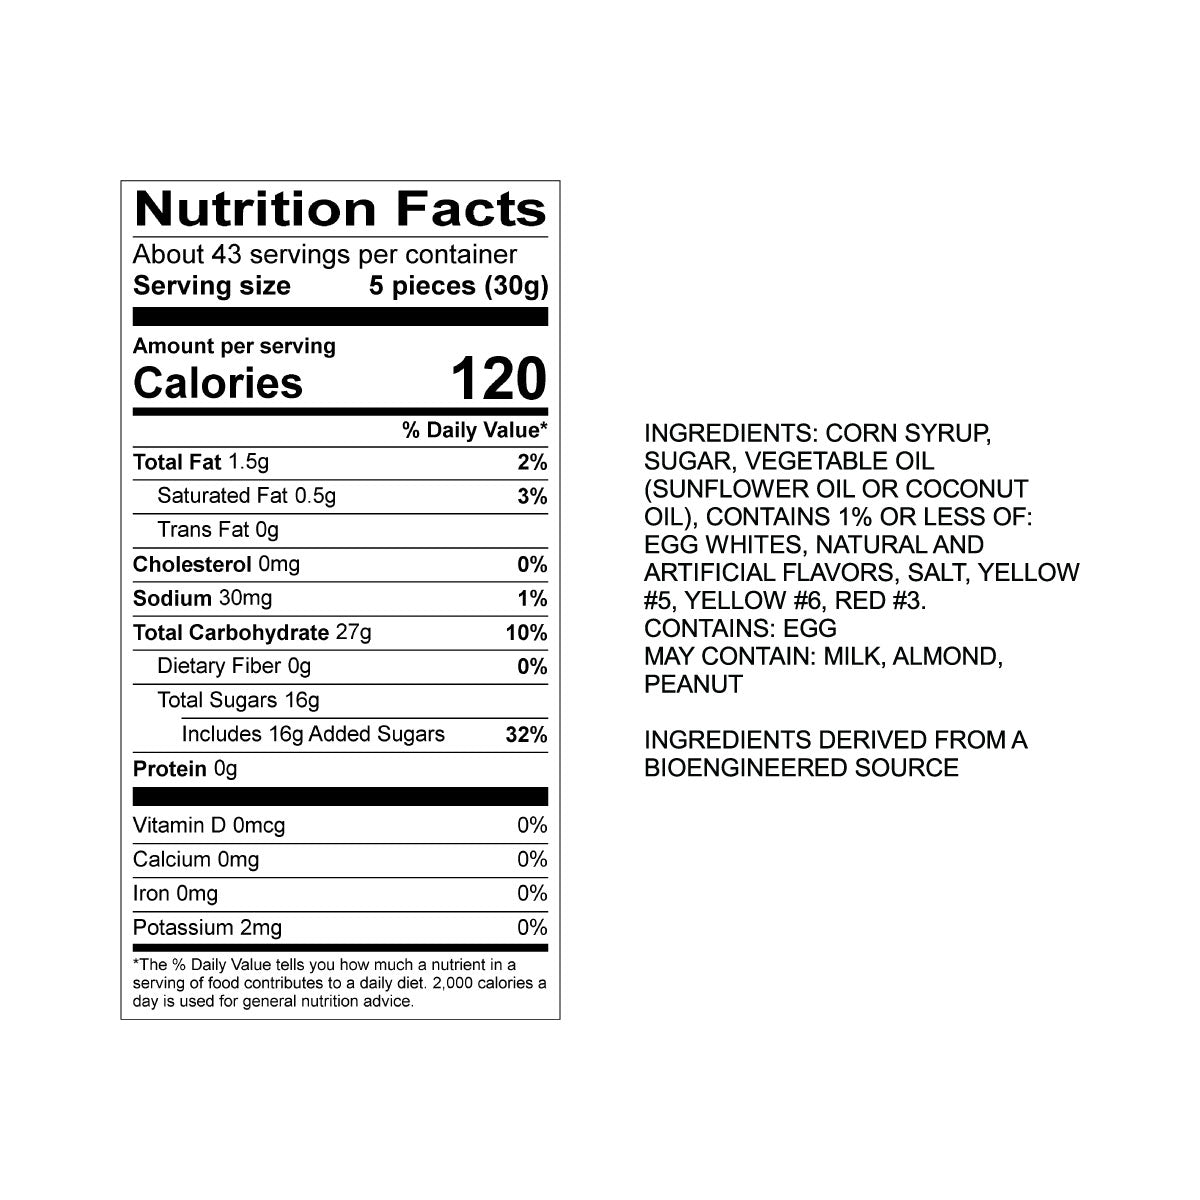 Sweet's Candy Corn Taffy Nutrition Fact Panel & Ingredients for the NET WT 2.82LB (1.28kg) Bulk Bag